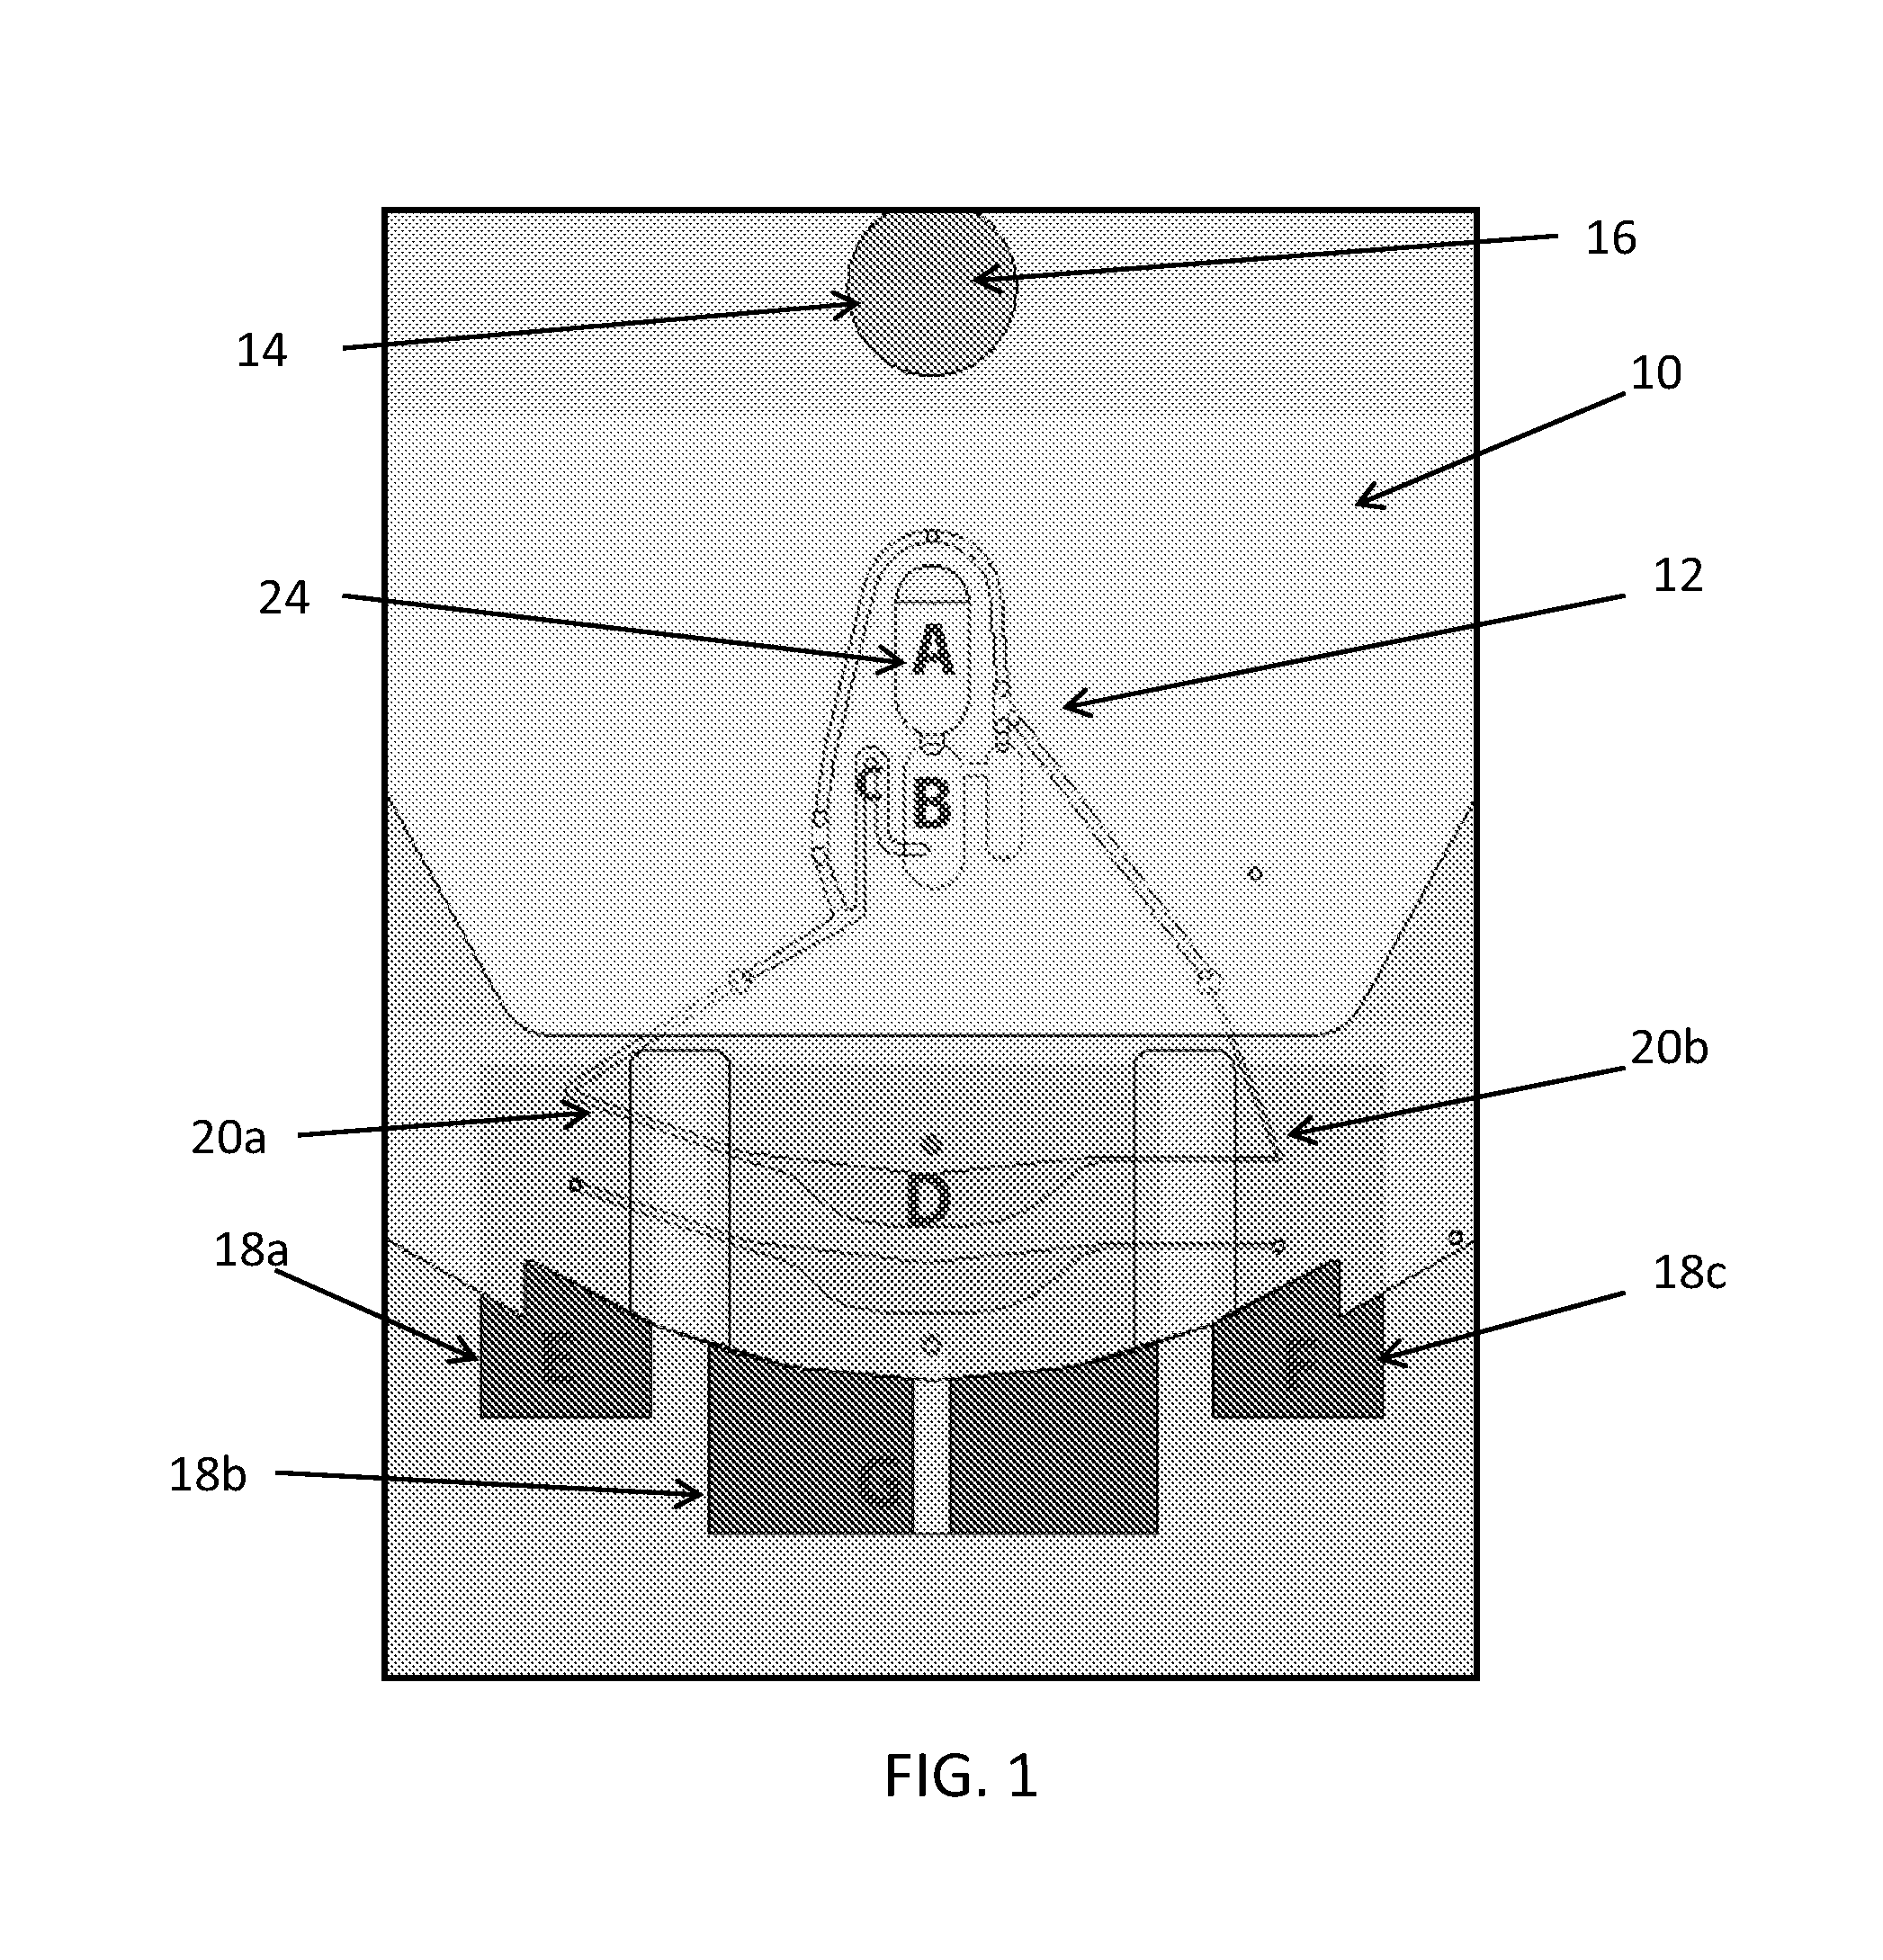 Centrifugal microfluidic system for nucleic acid sample preparation, amplification, and detection